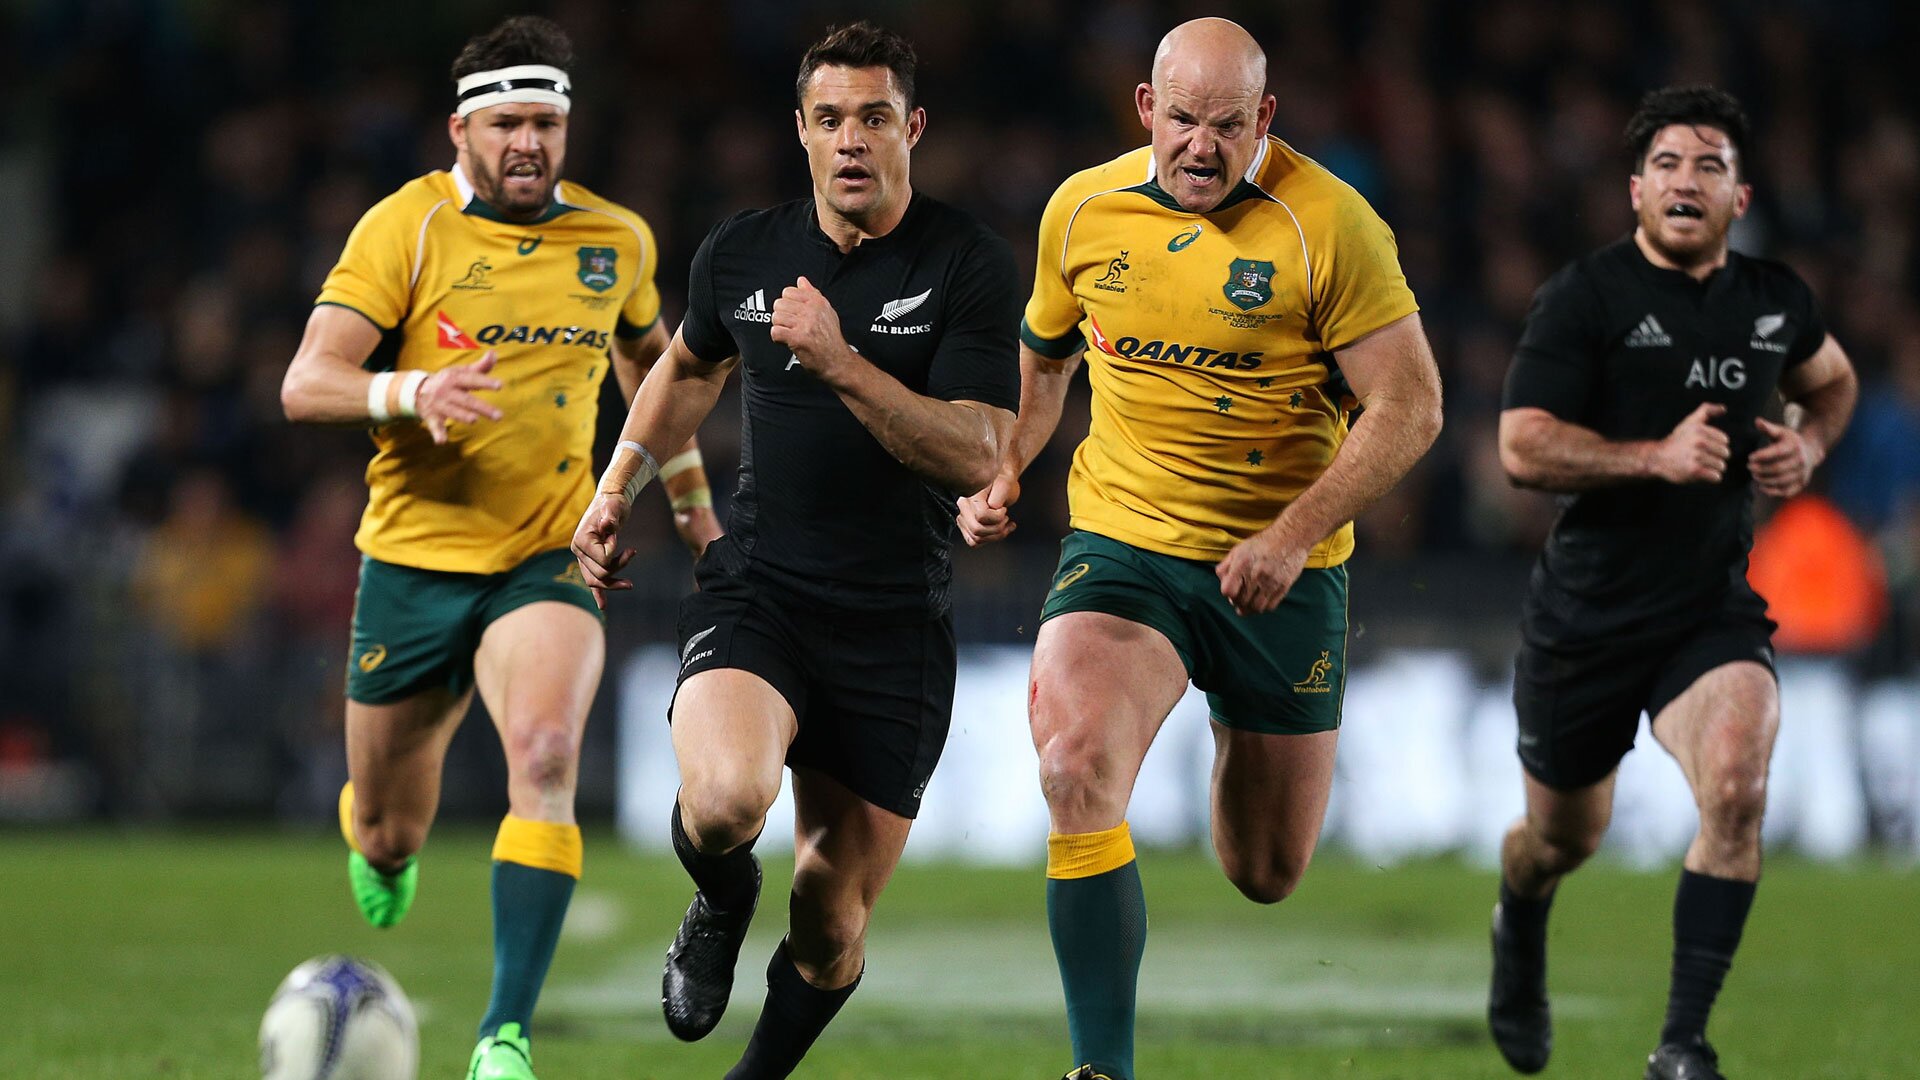 Pain by numbers: just how dominant have the All Blacks been?